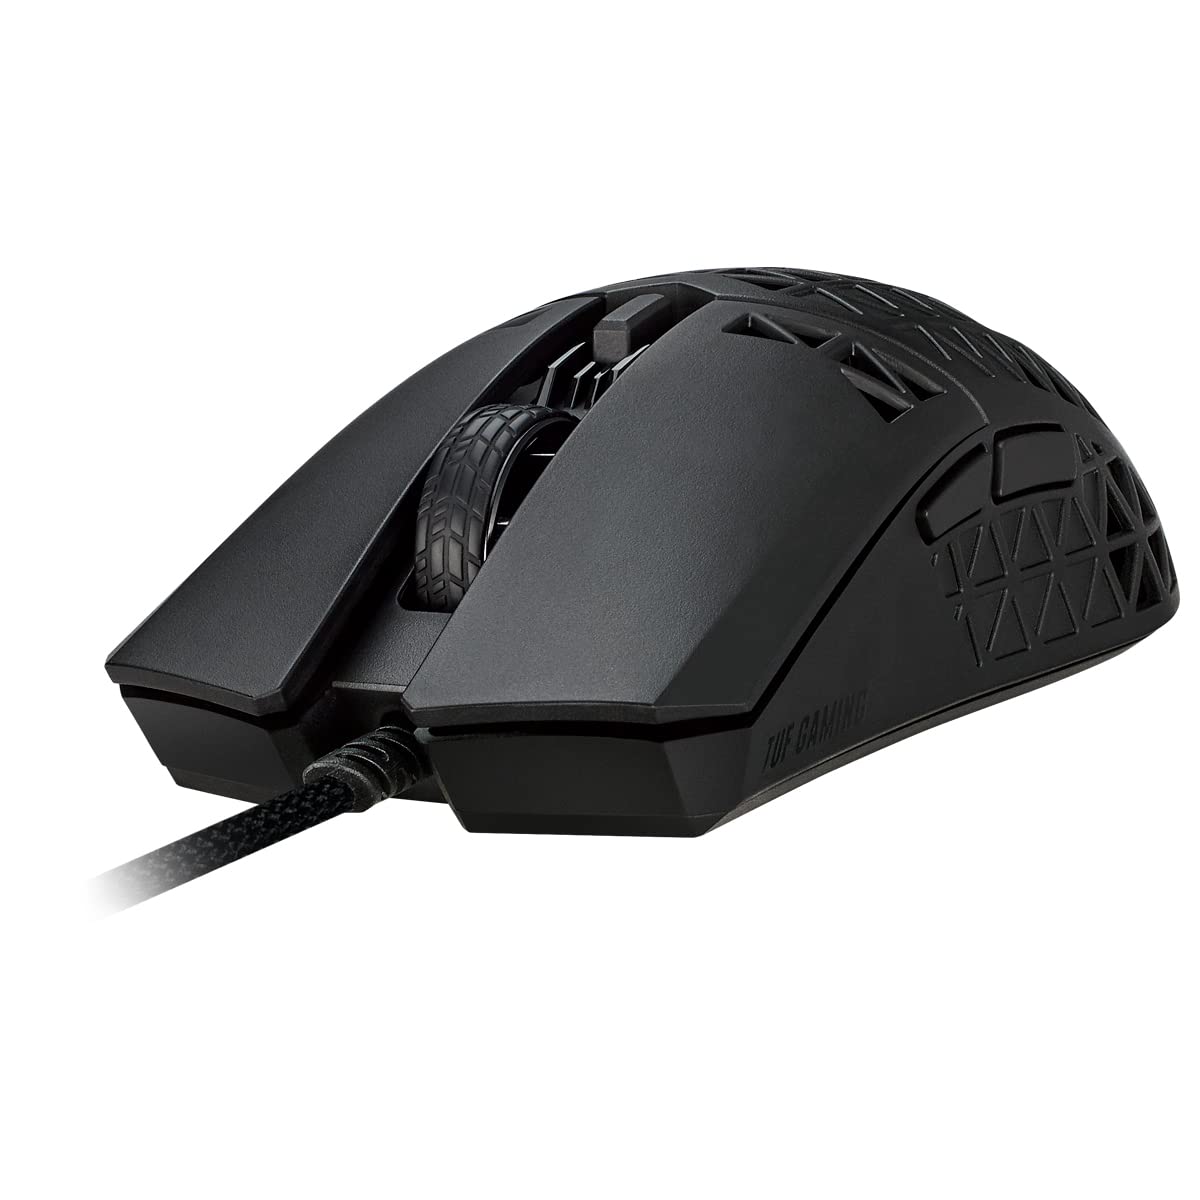 ASUS TUF USB Gaming M4 Air Lightweight Wired Gaming Mouse